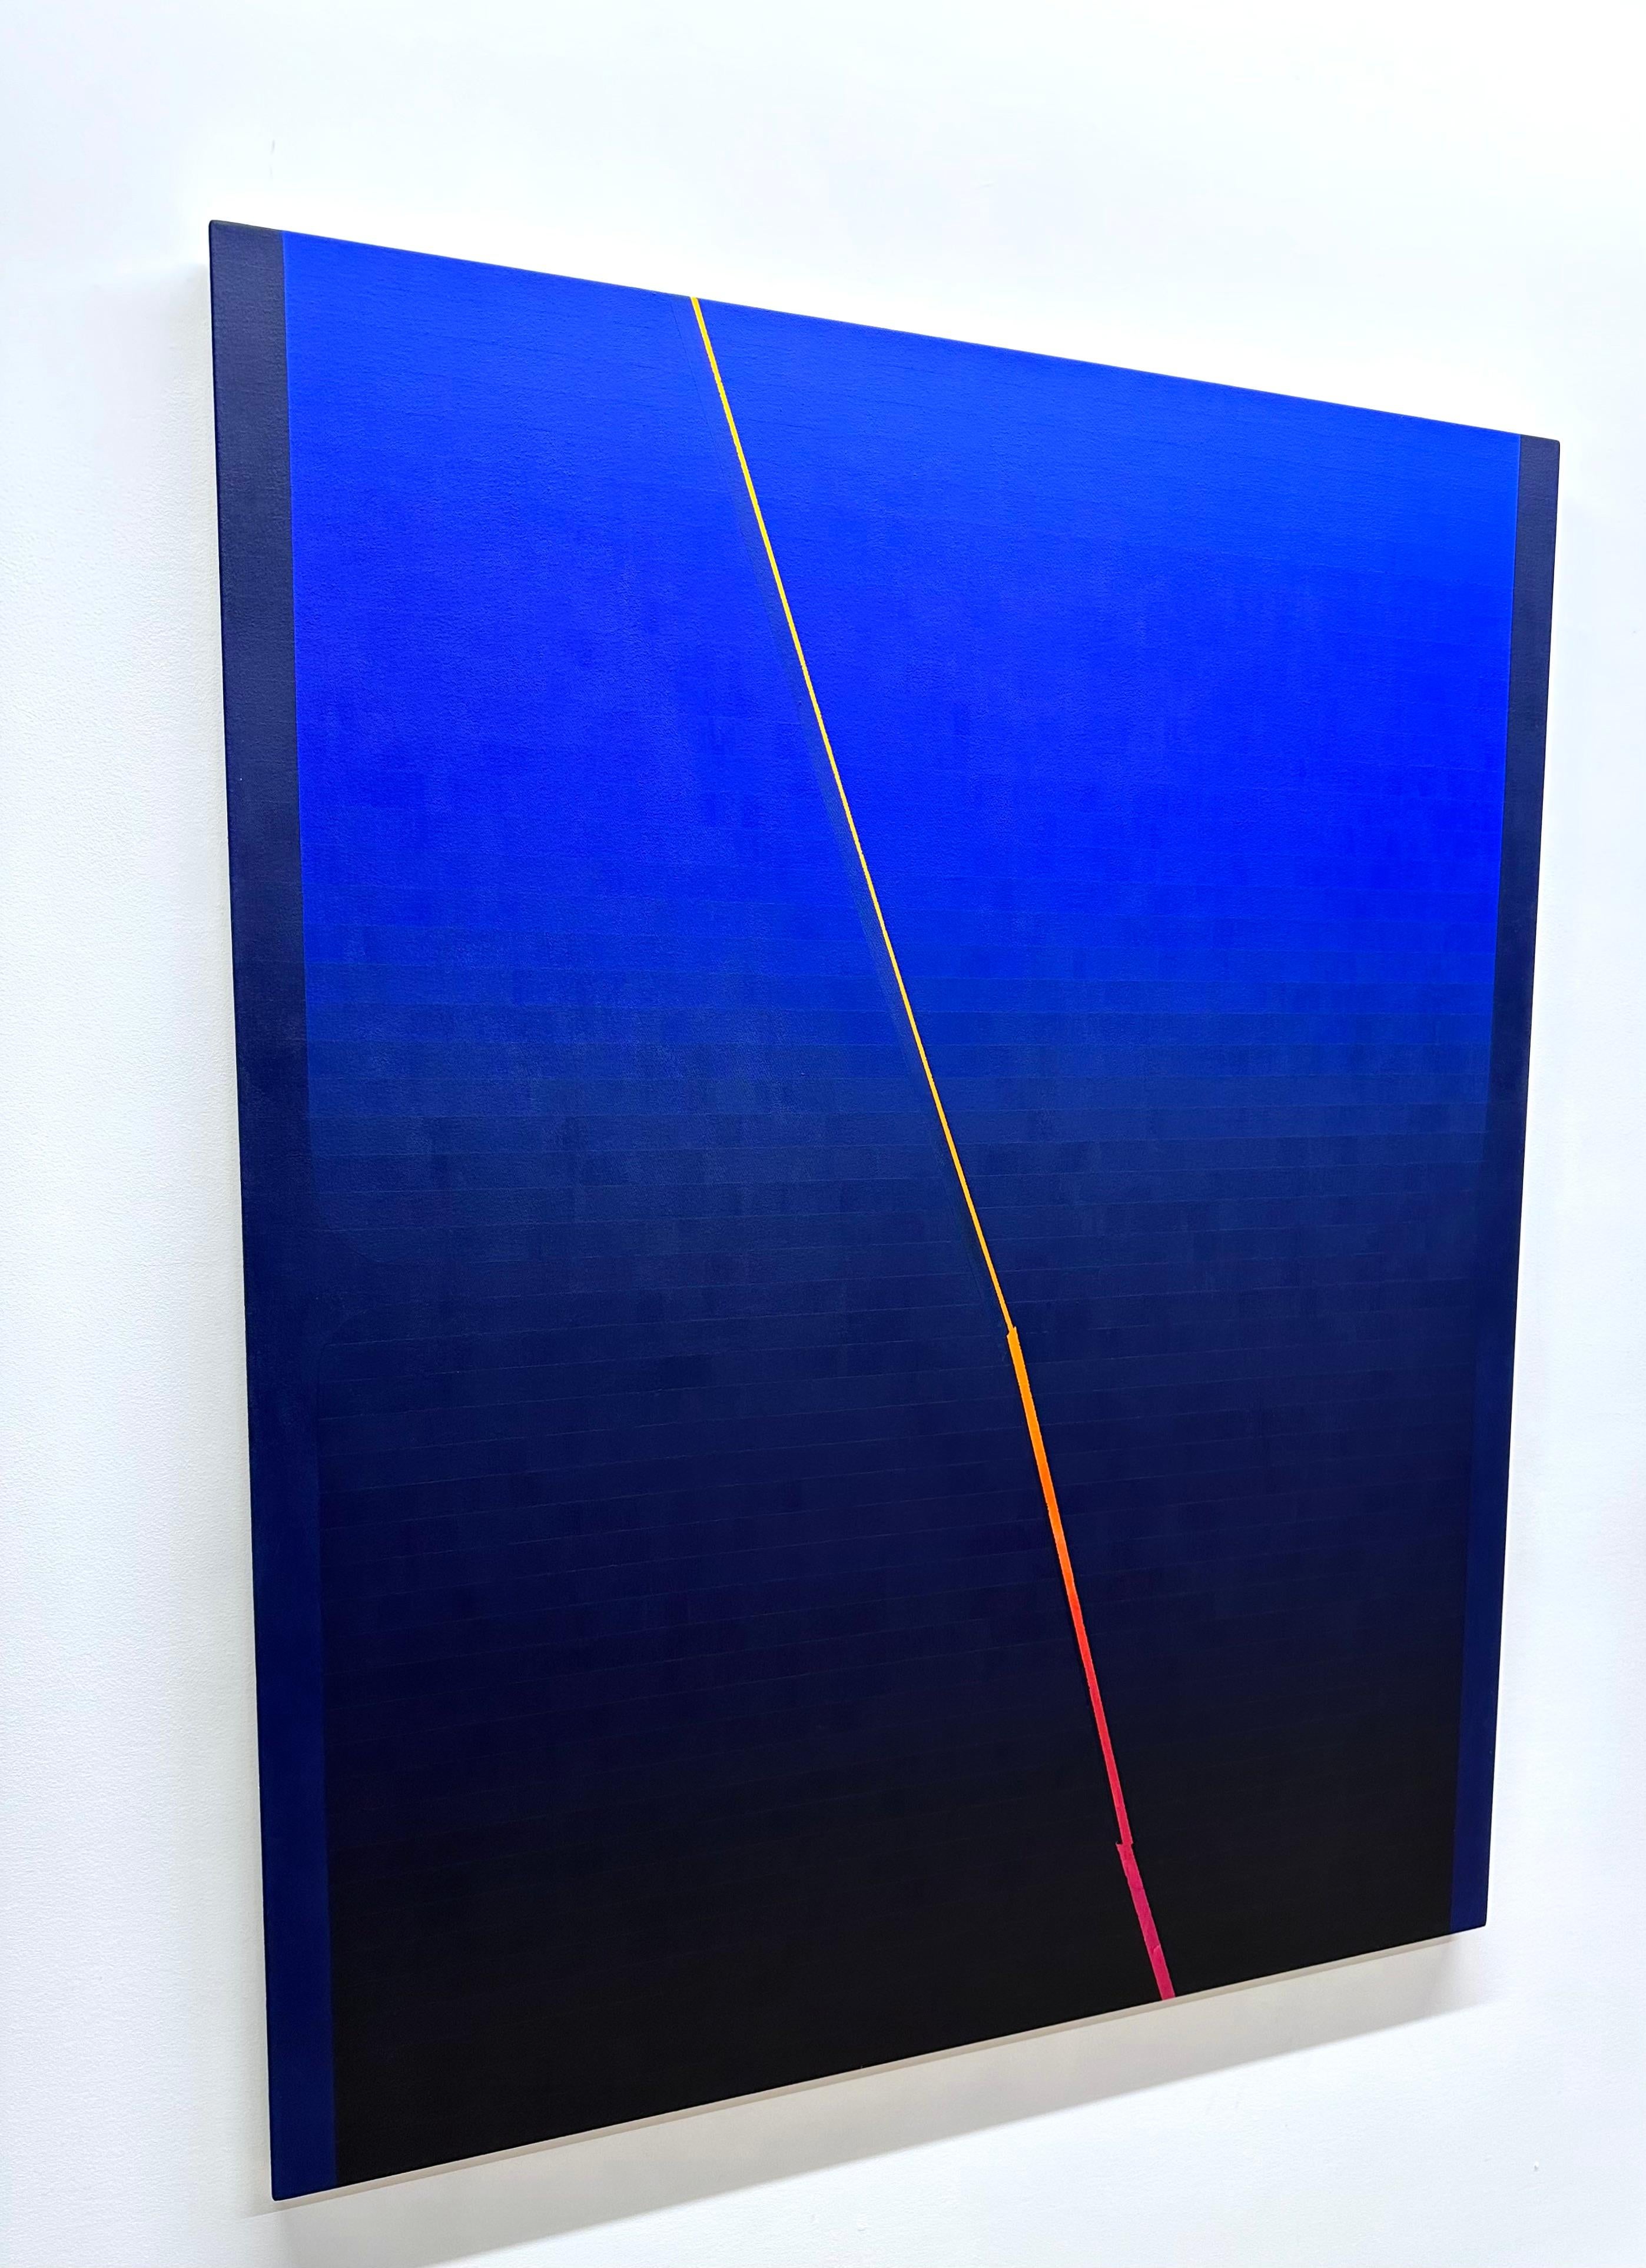 Horizontal stripes of color in gradient shades of cobalt blue from 
bright lapis to midnight navy are split diagonally down the middle in a streak of luminous golden orange transitioning to hot pink. Signed and titled on verso.

Audrey Stone has